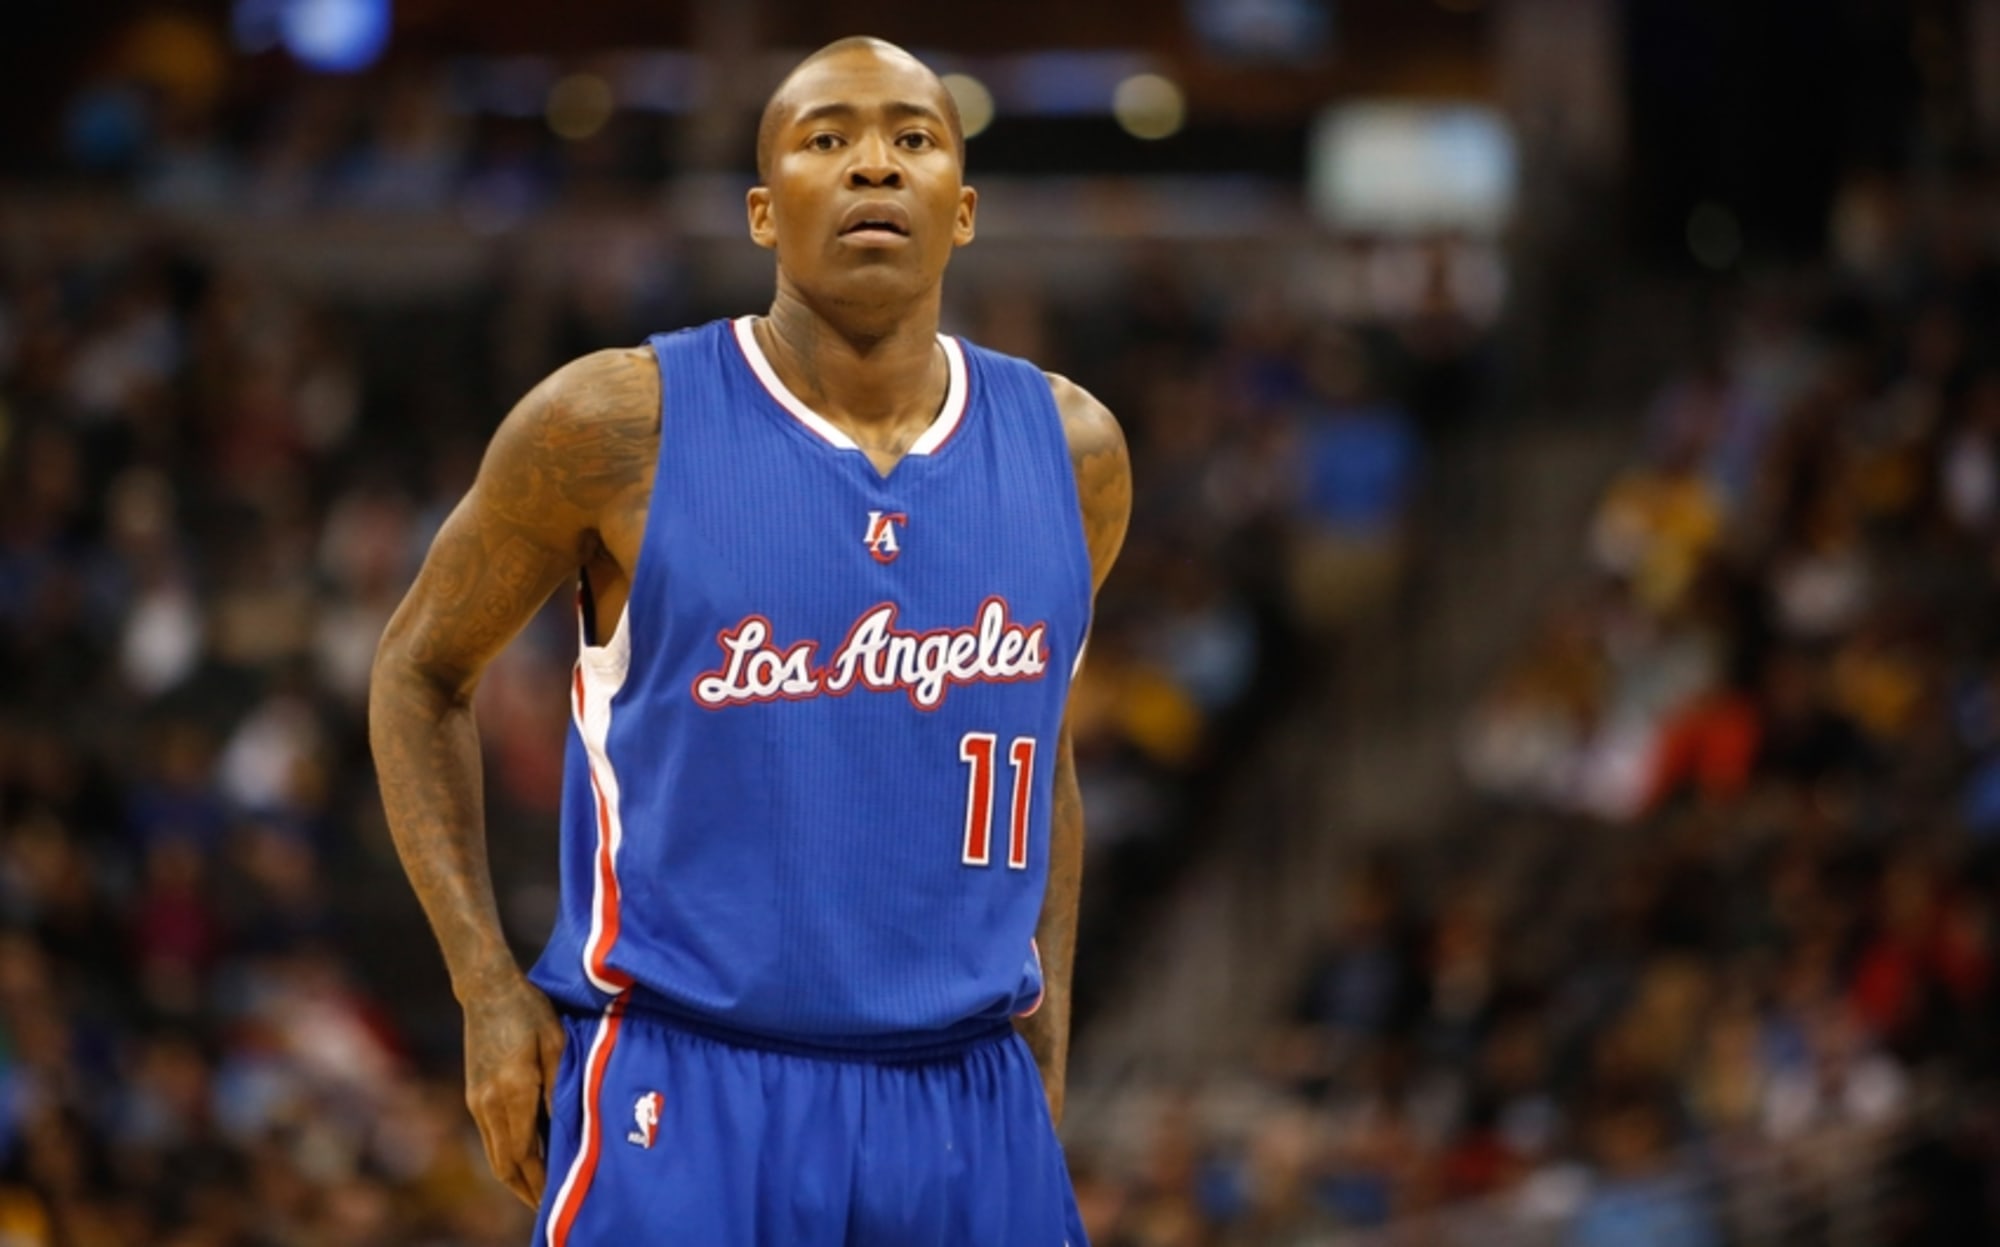 jamal crawford clippers jersey